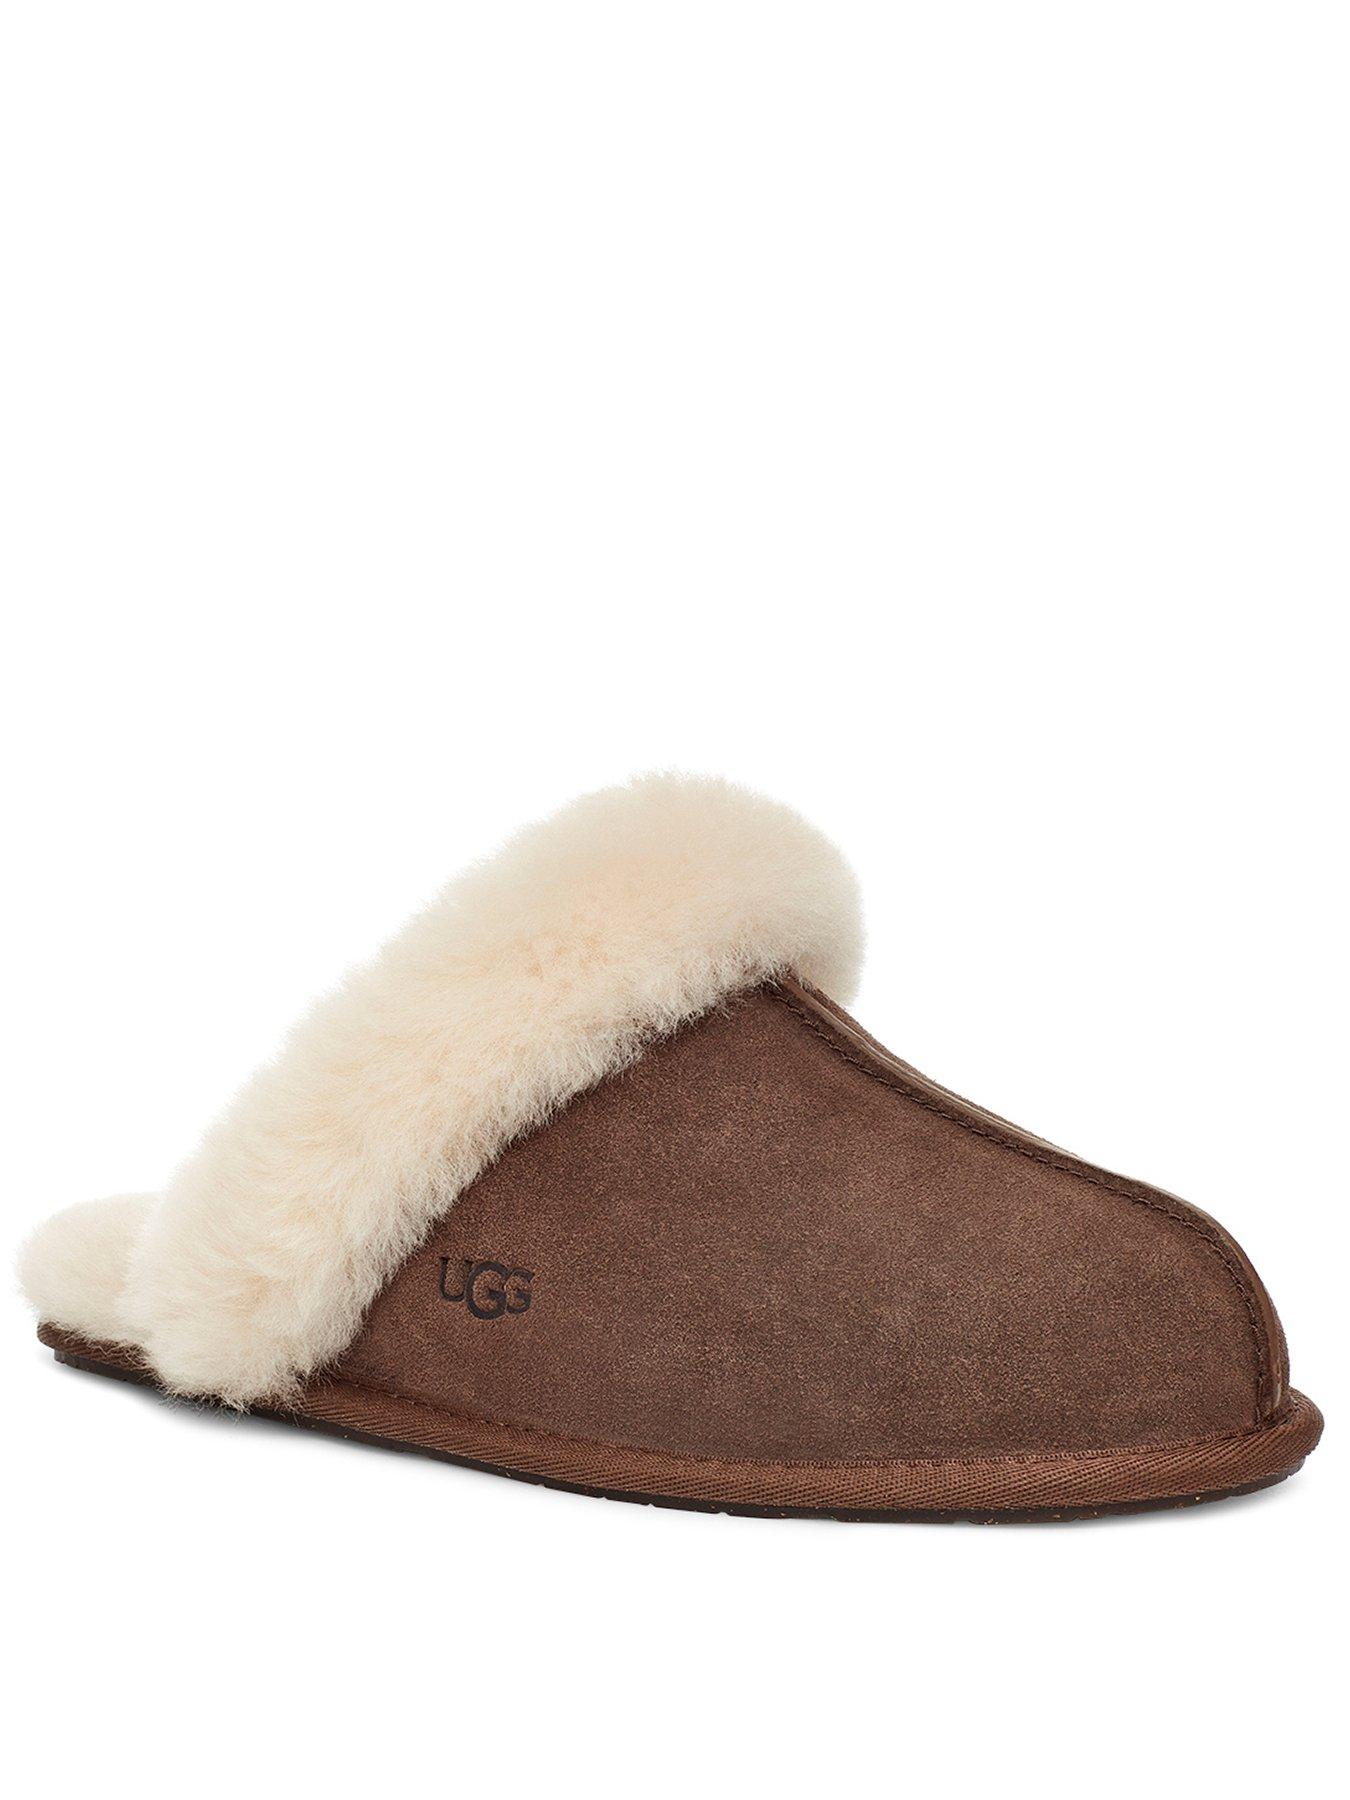 ugg inserts slippers